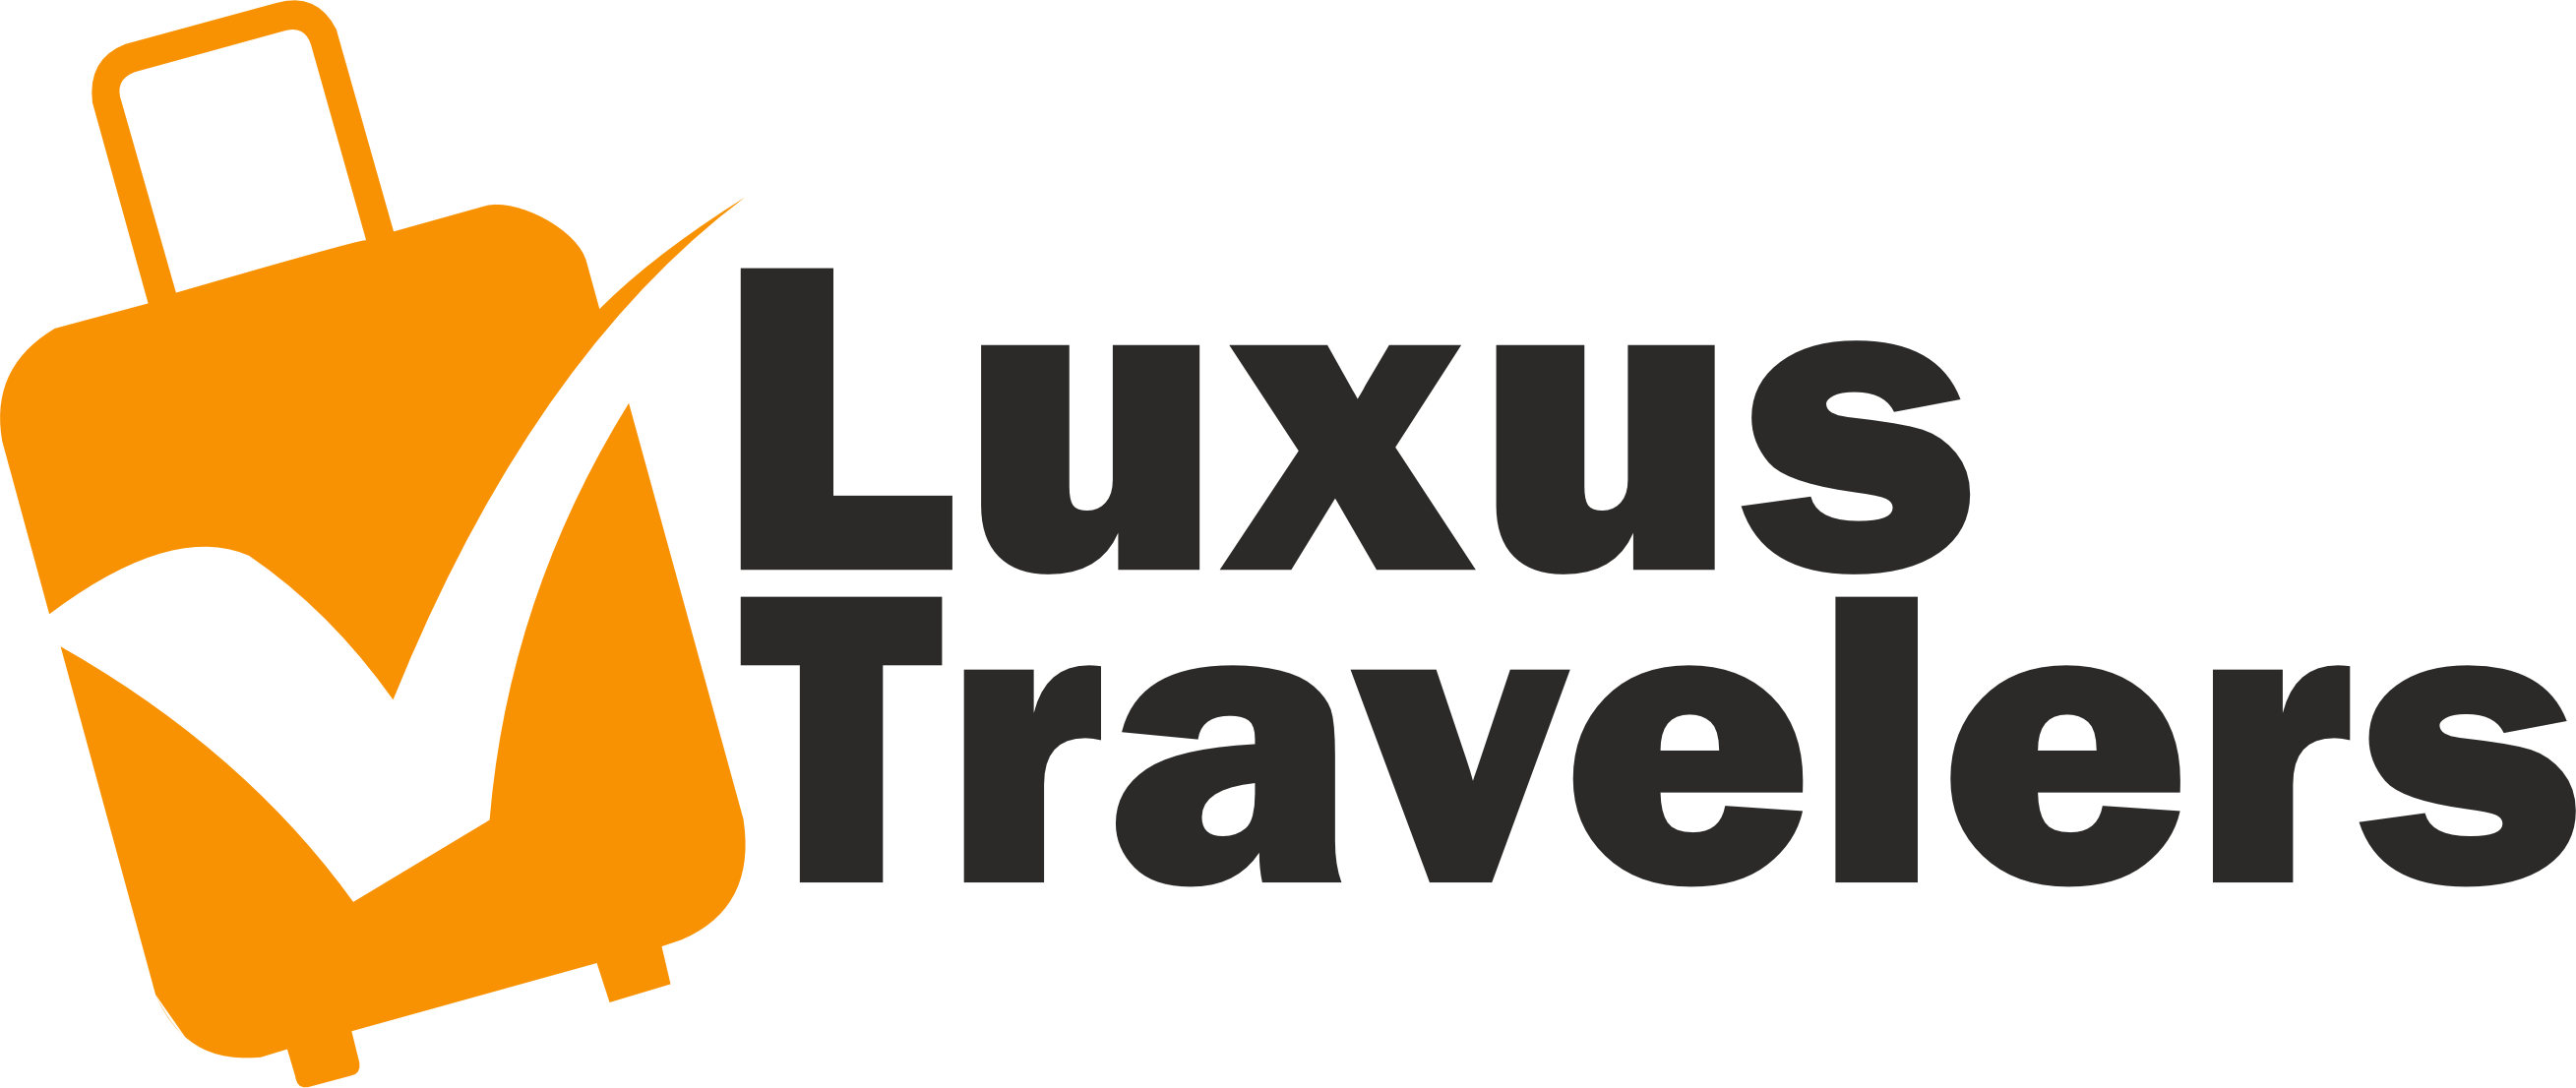 Discover the best luxury travelers, Tours Tips, Business Tour and tour package tips